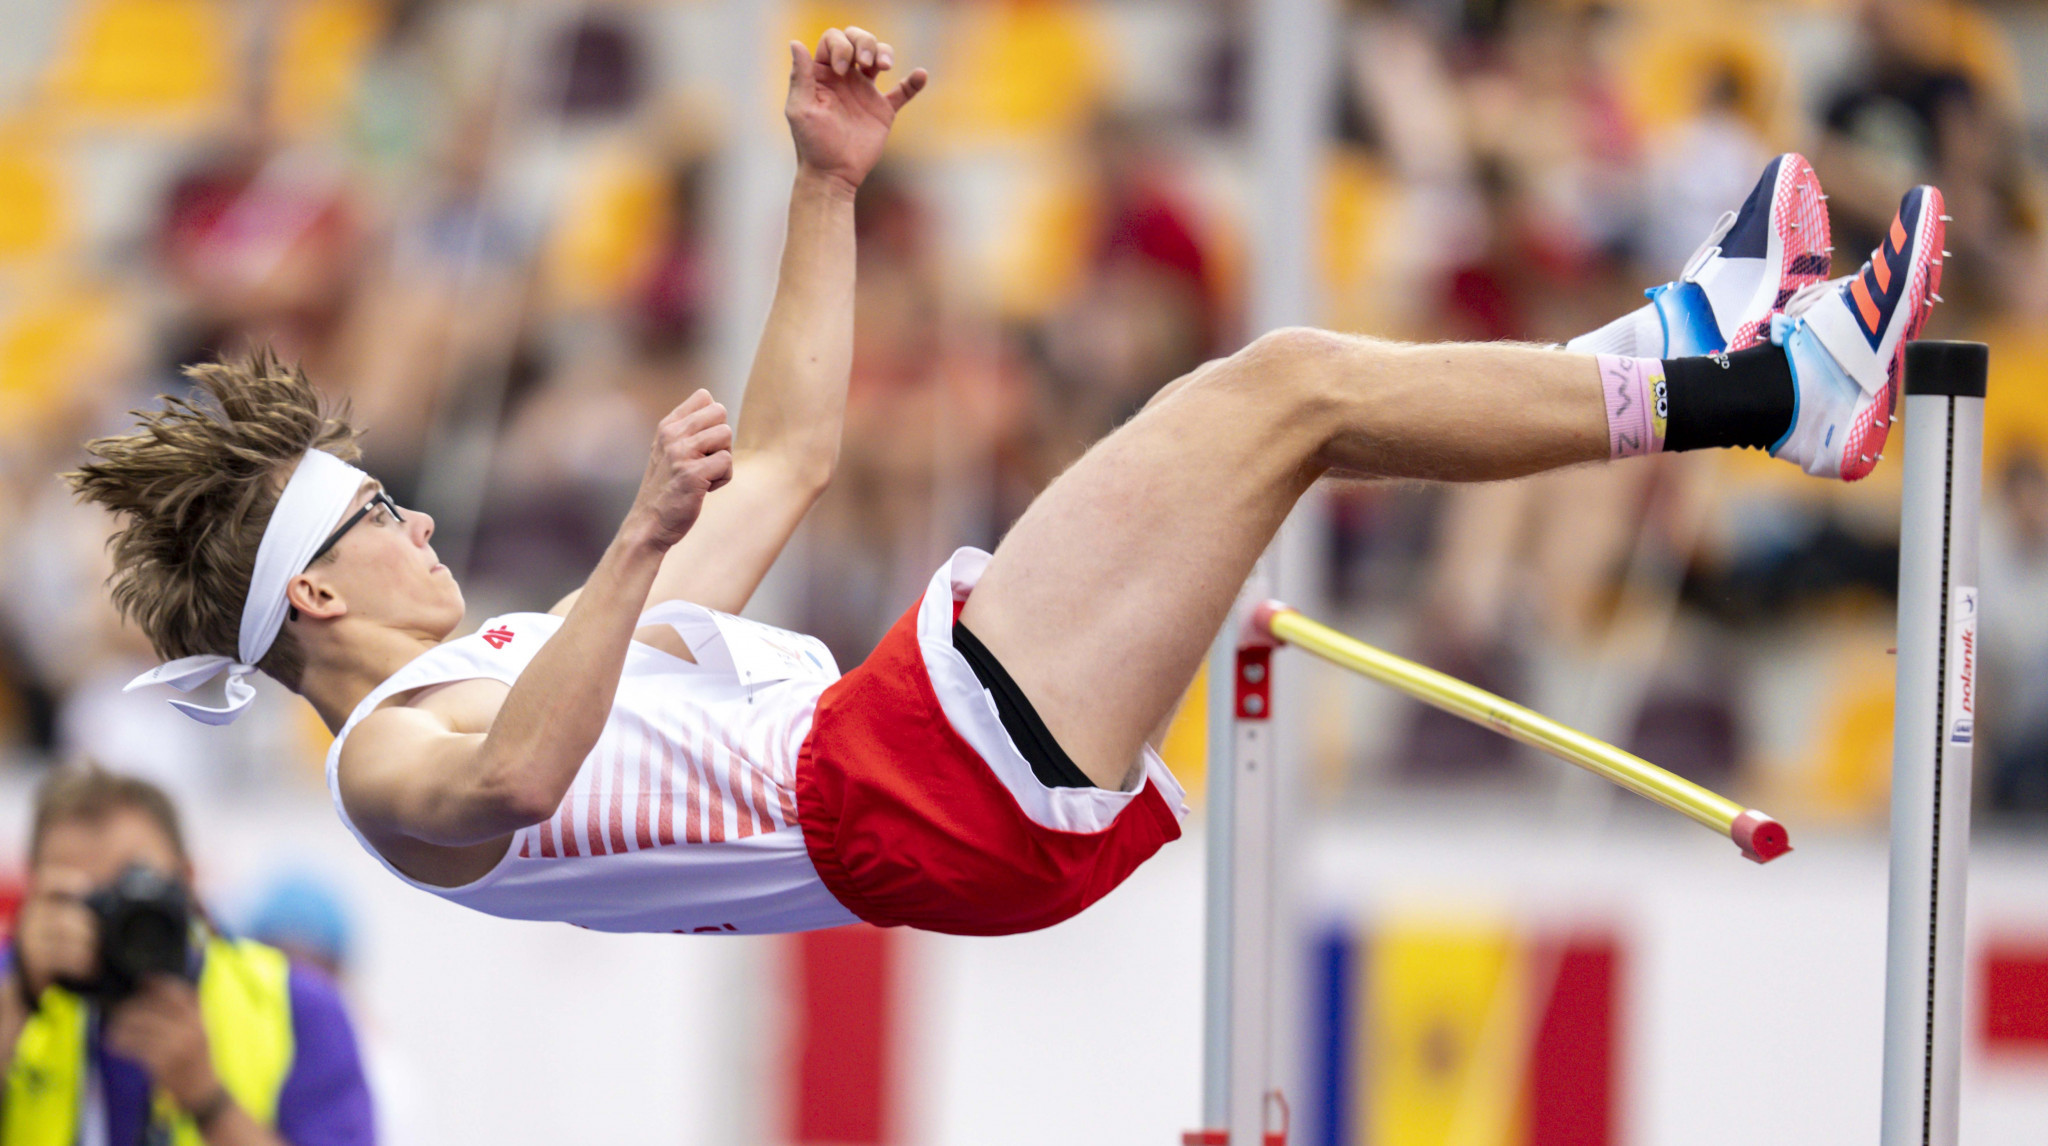 Poland's Sebastian Antosiak leapt to victory as he cleared 2.06 metres in the boys' high jump ©EYOF Banská Bystrica 2022